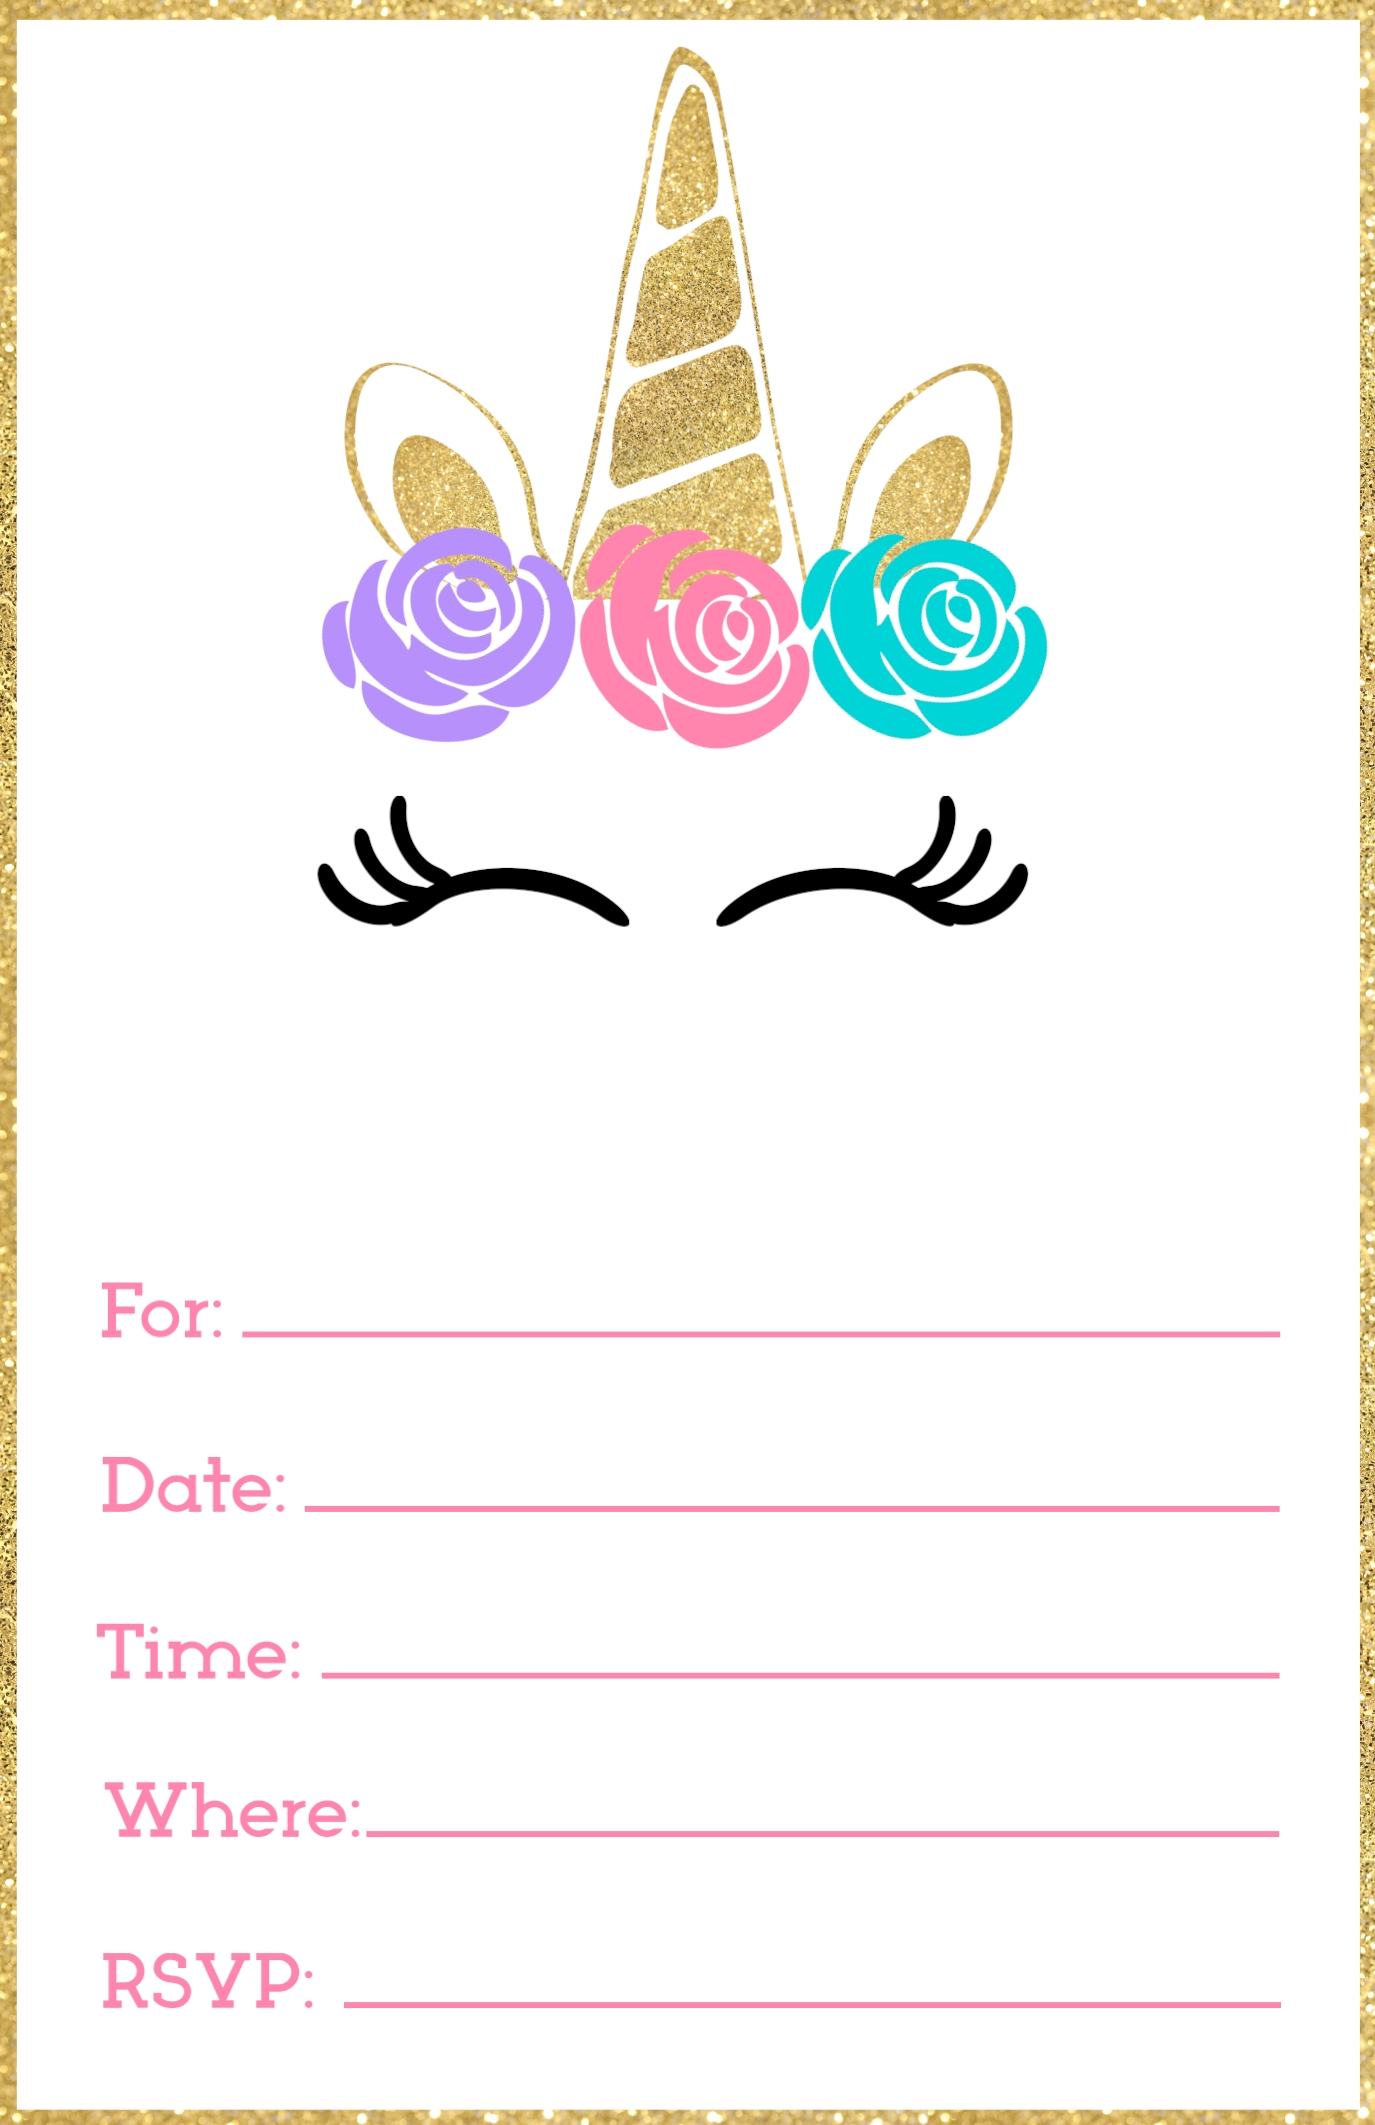 Free Printable Unicorn Invitations Template Paper Trail Design - Free Printable Birthday Invitations With Pictures